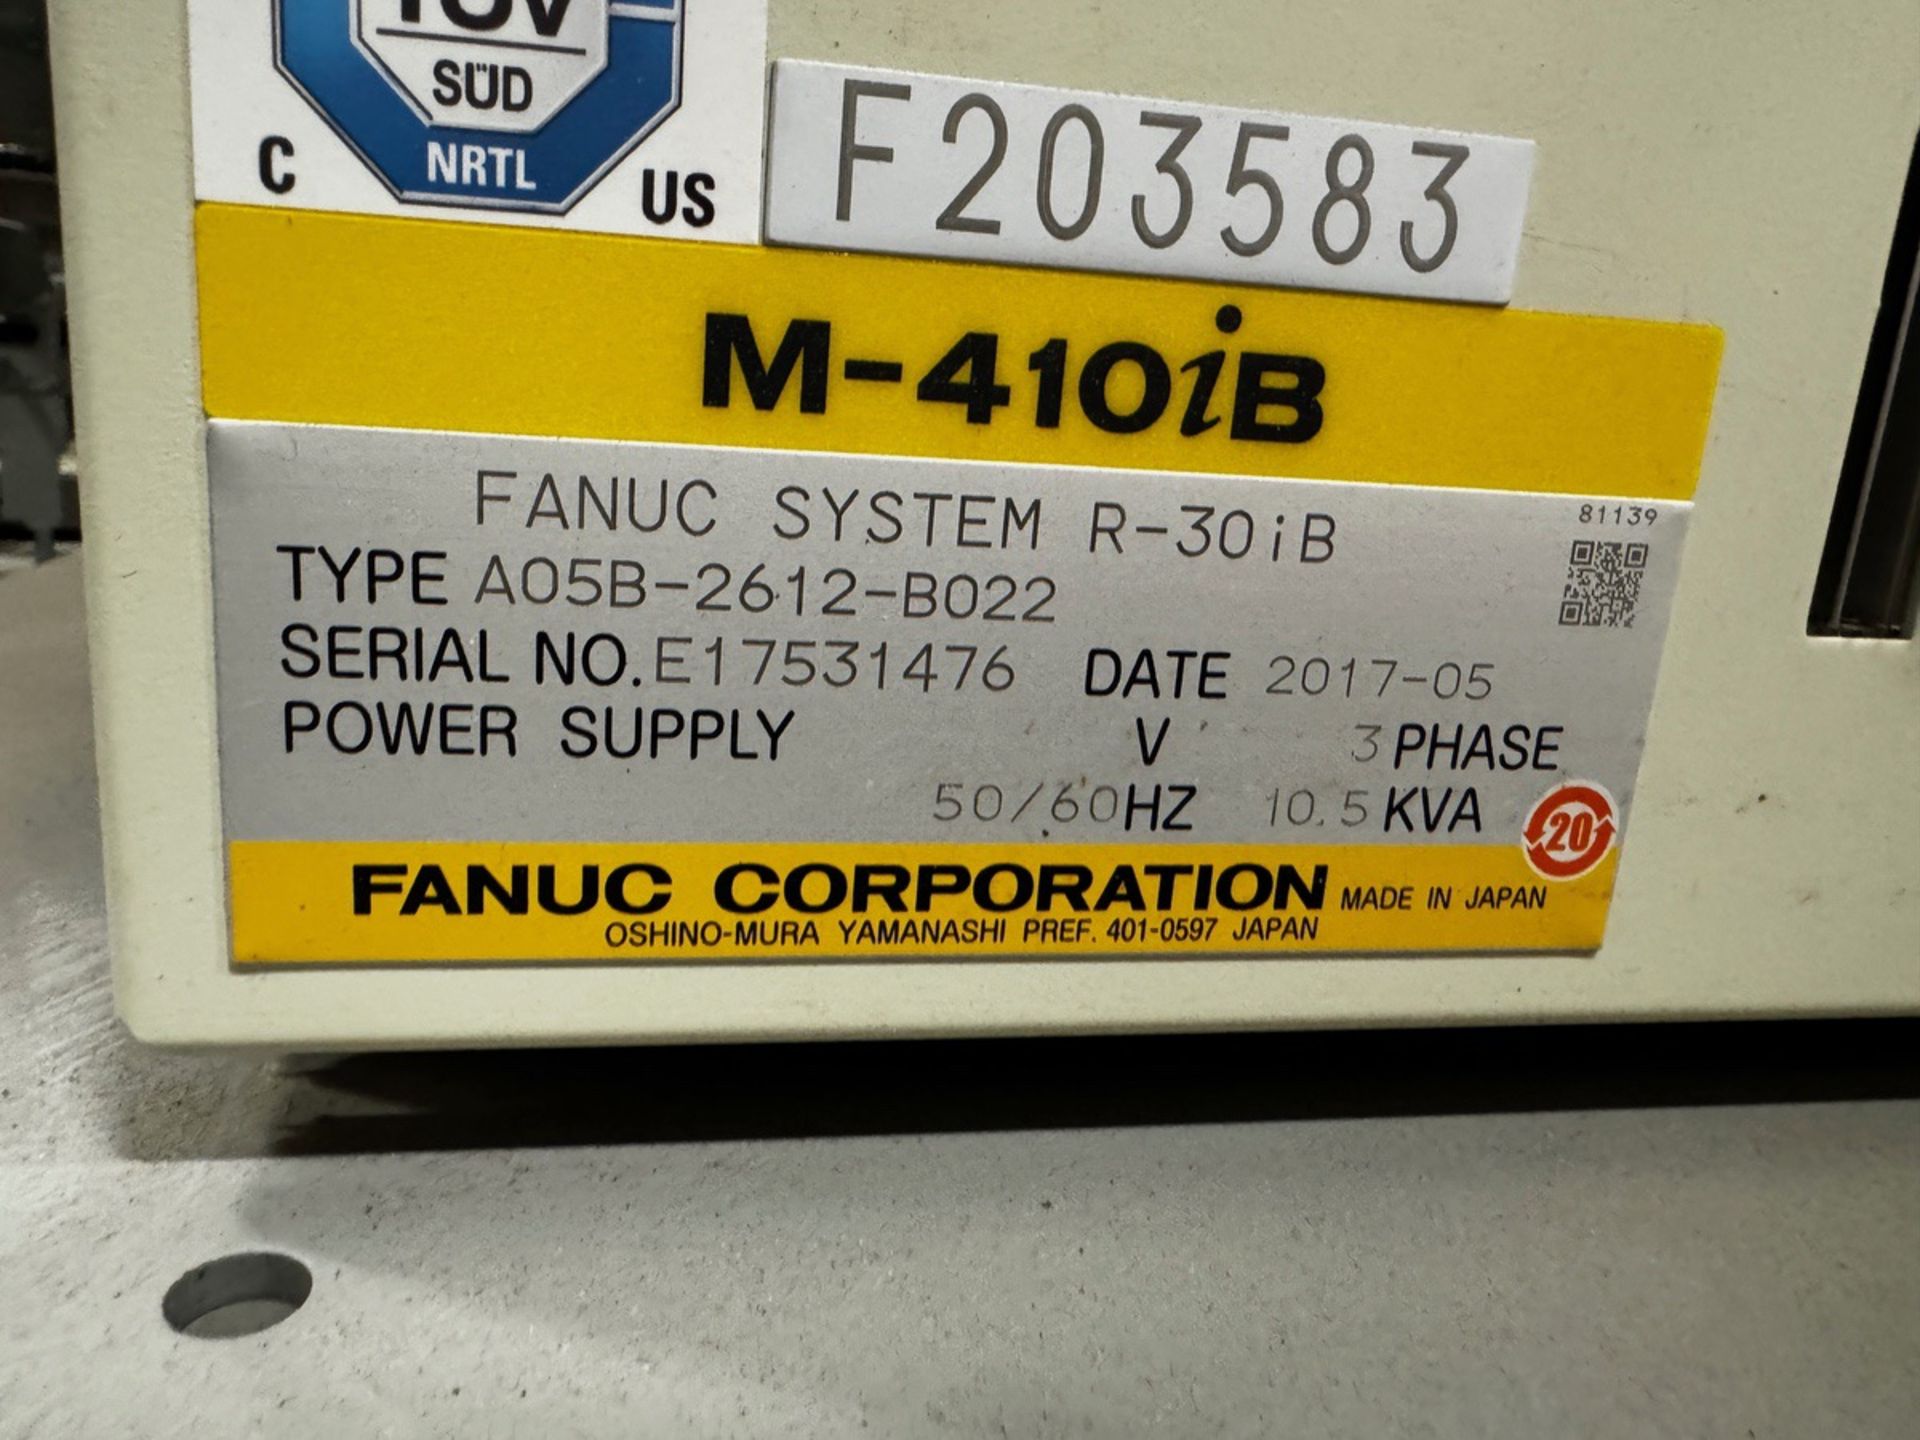 2018 FLEXiCELL Automated Palletizing Delivery System with 2017 Fanuc M-410iB 140H High Speed Palleti - Image 23 of 27